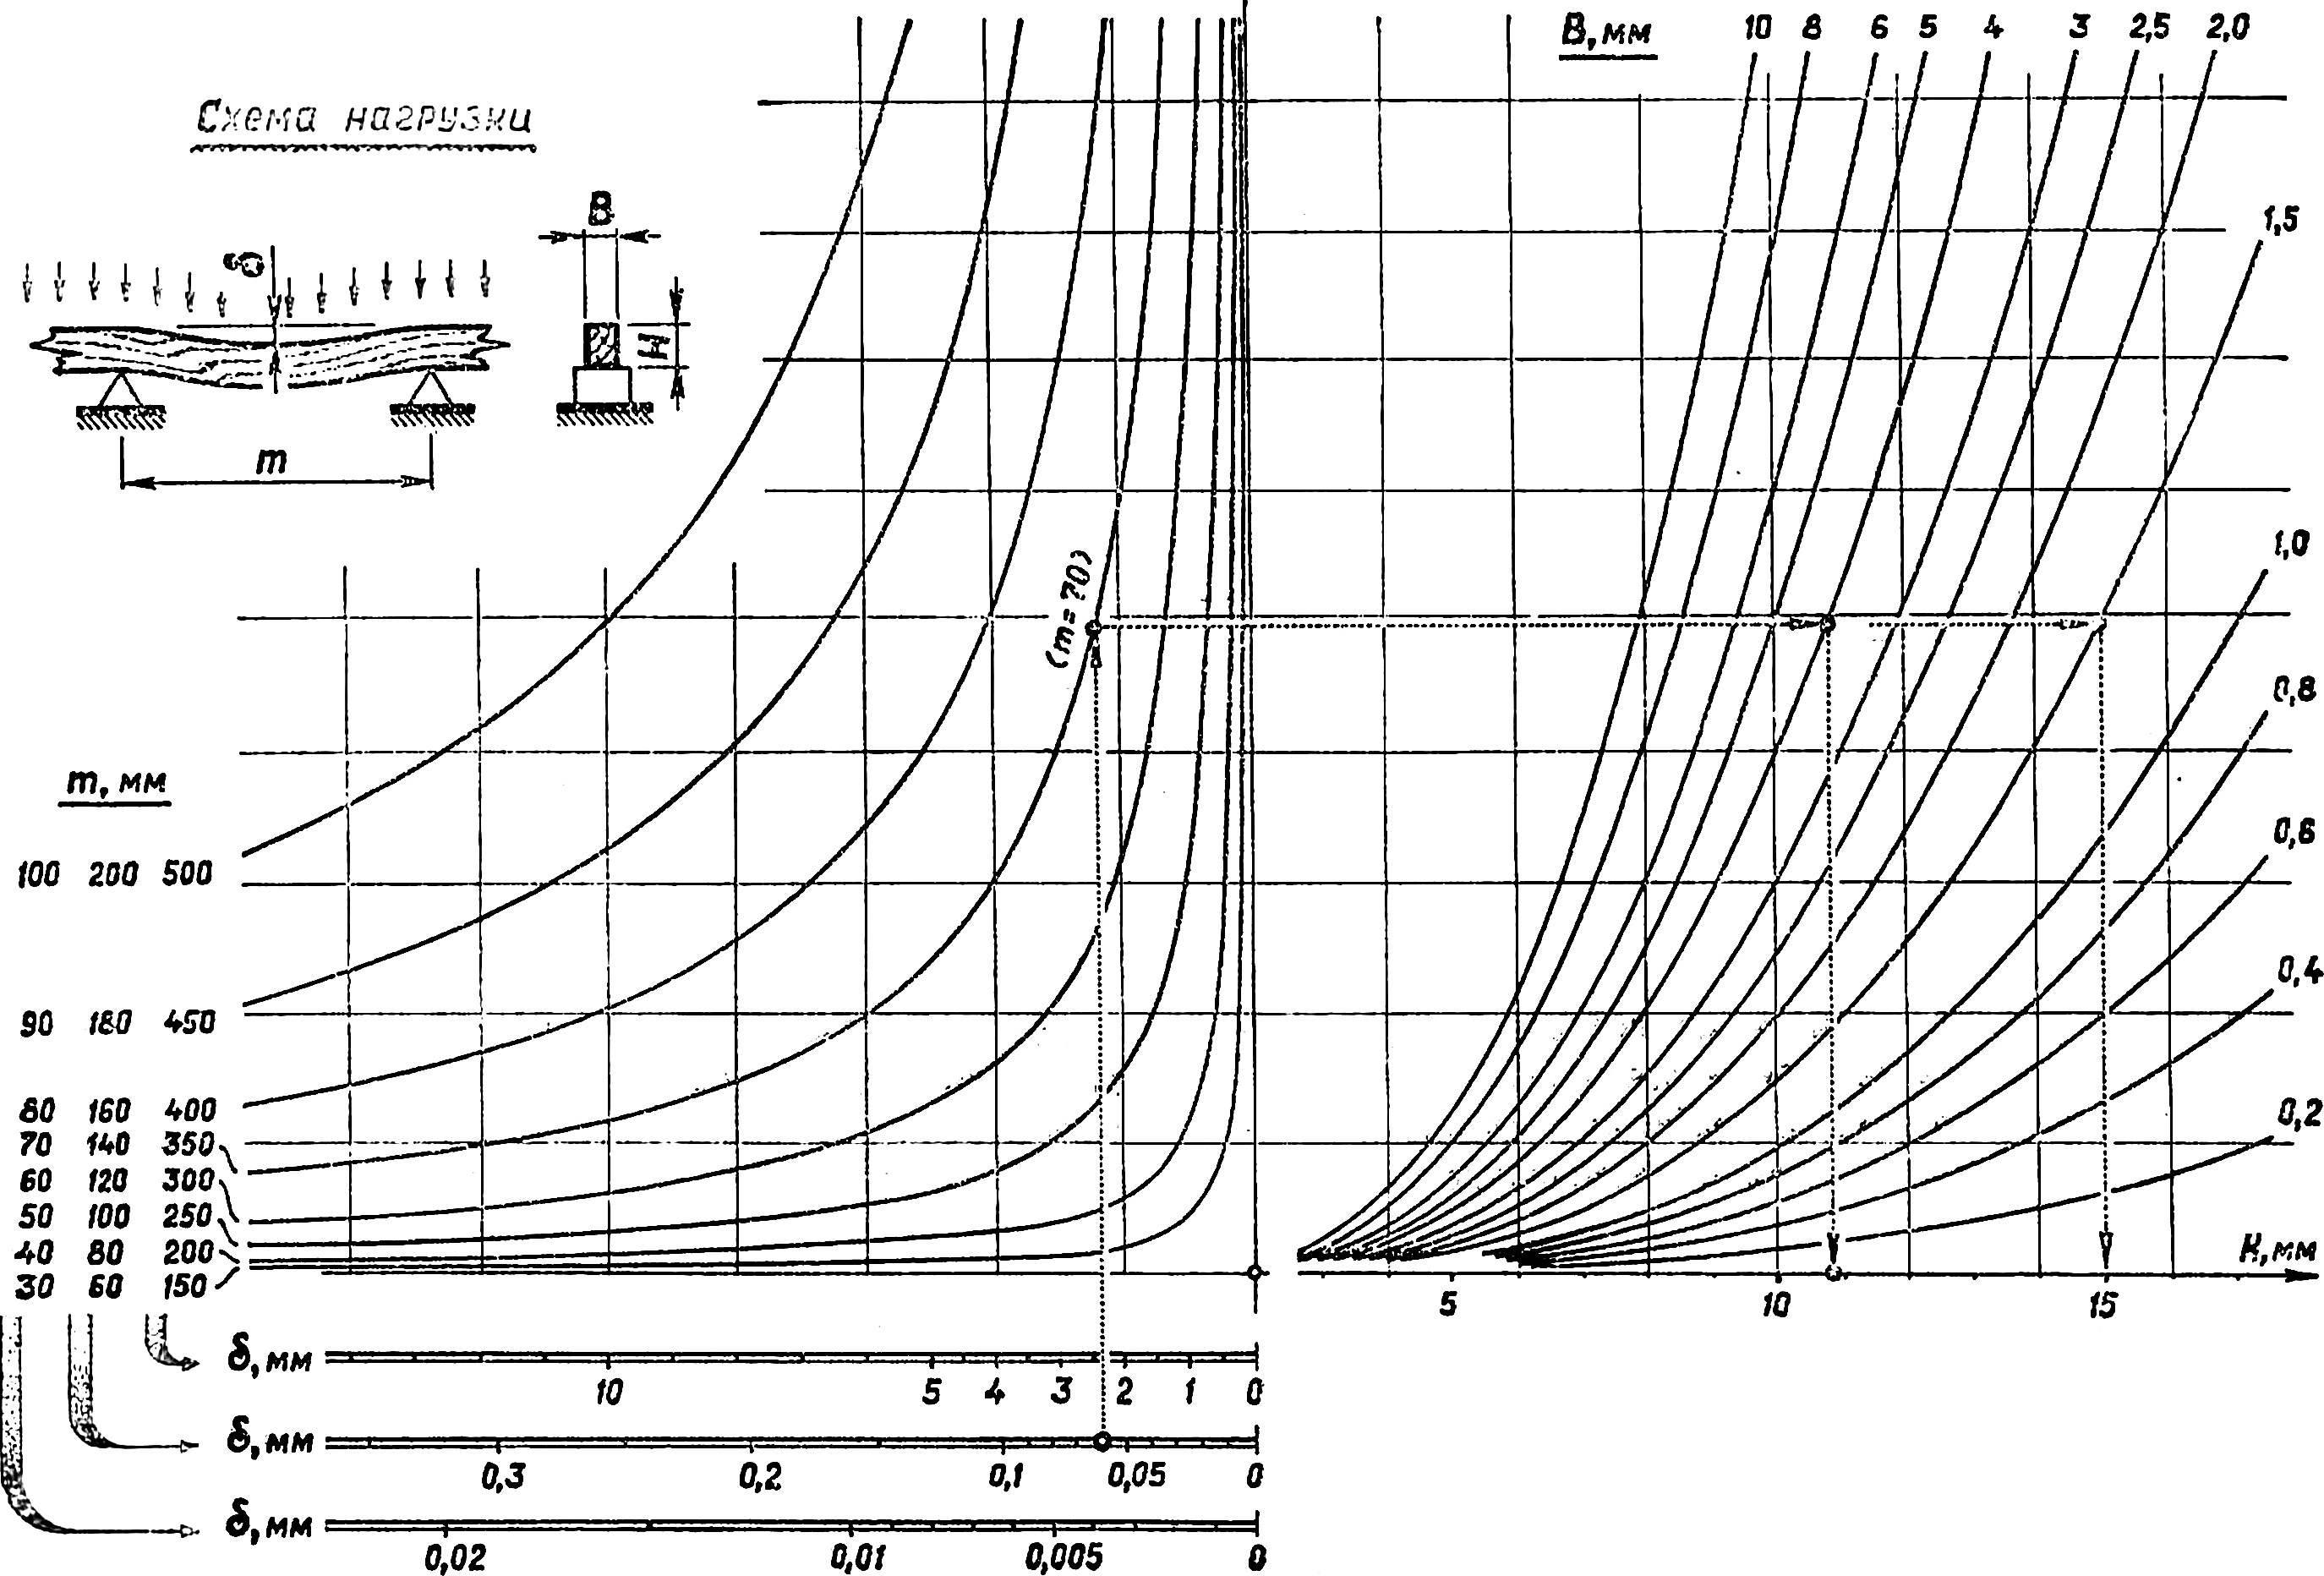 Nomogram for determination of deflections of the stringers and edges of the tension Mylar film 0.025 mm.